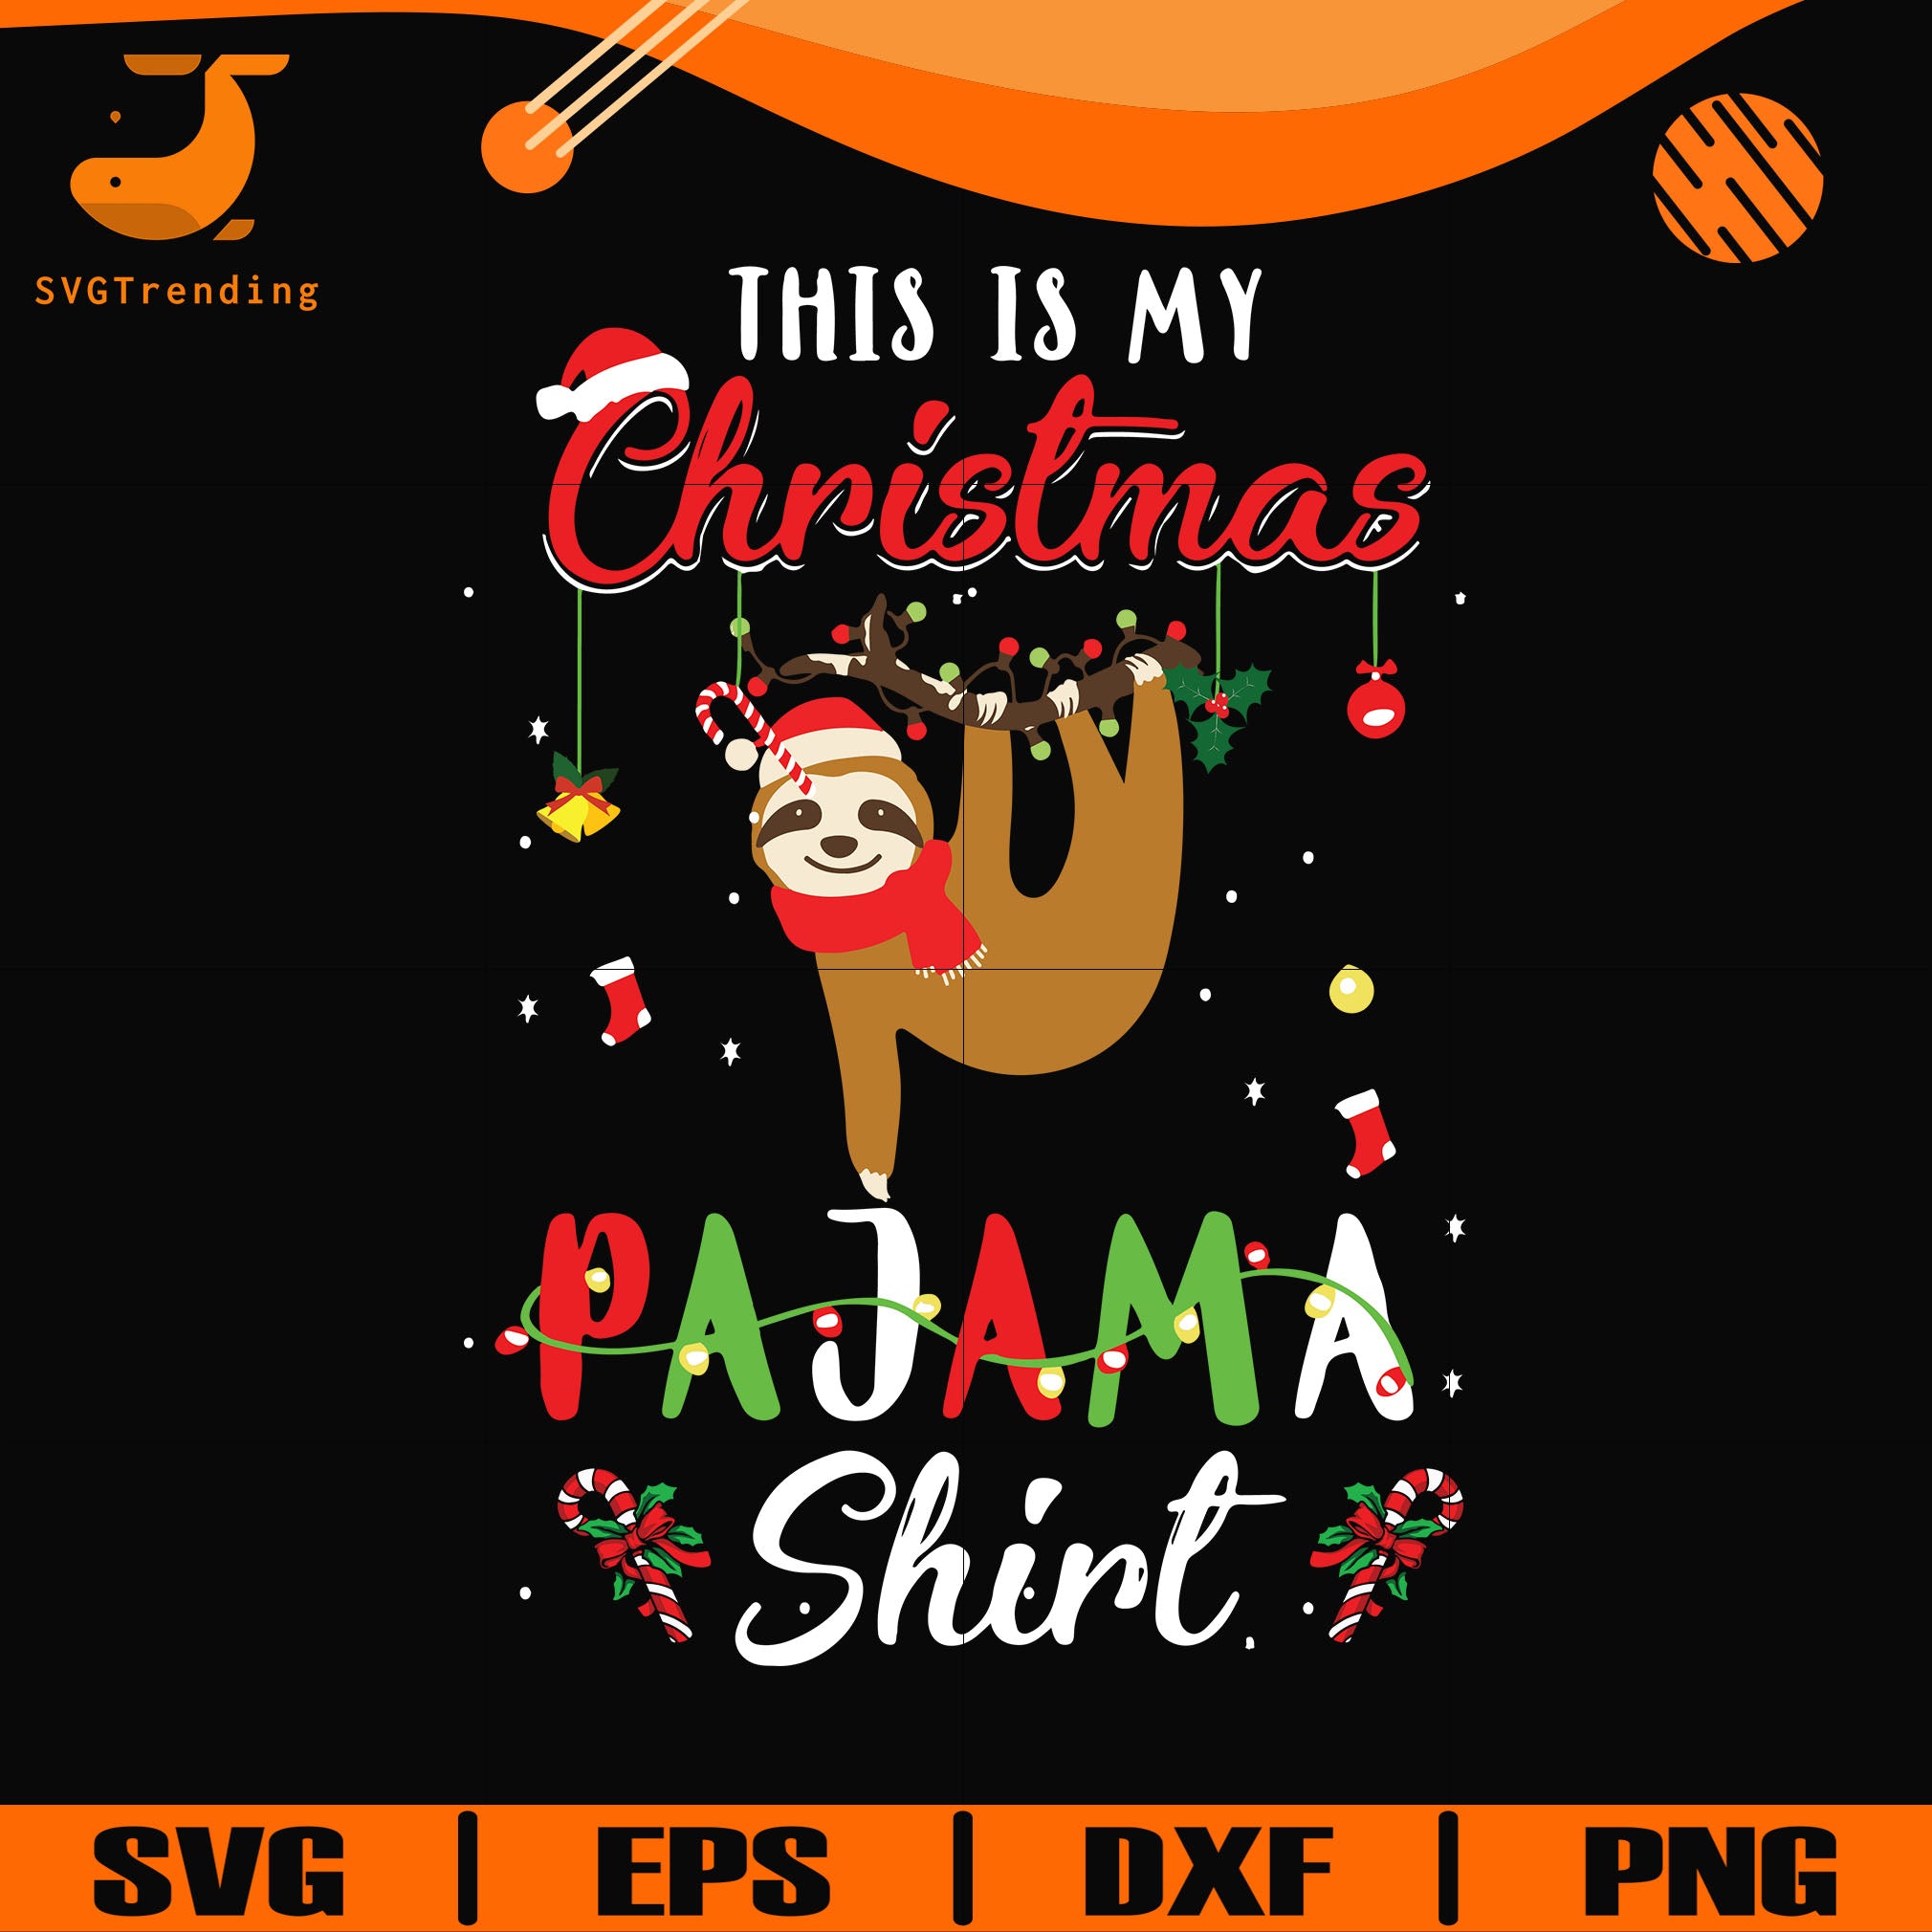 Download This Is My Christmas Pajama Shirt Sloth Svg Png Dxf Eps Digital Fil Svgtrending